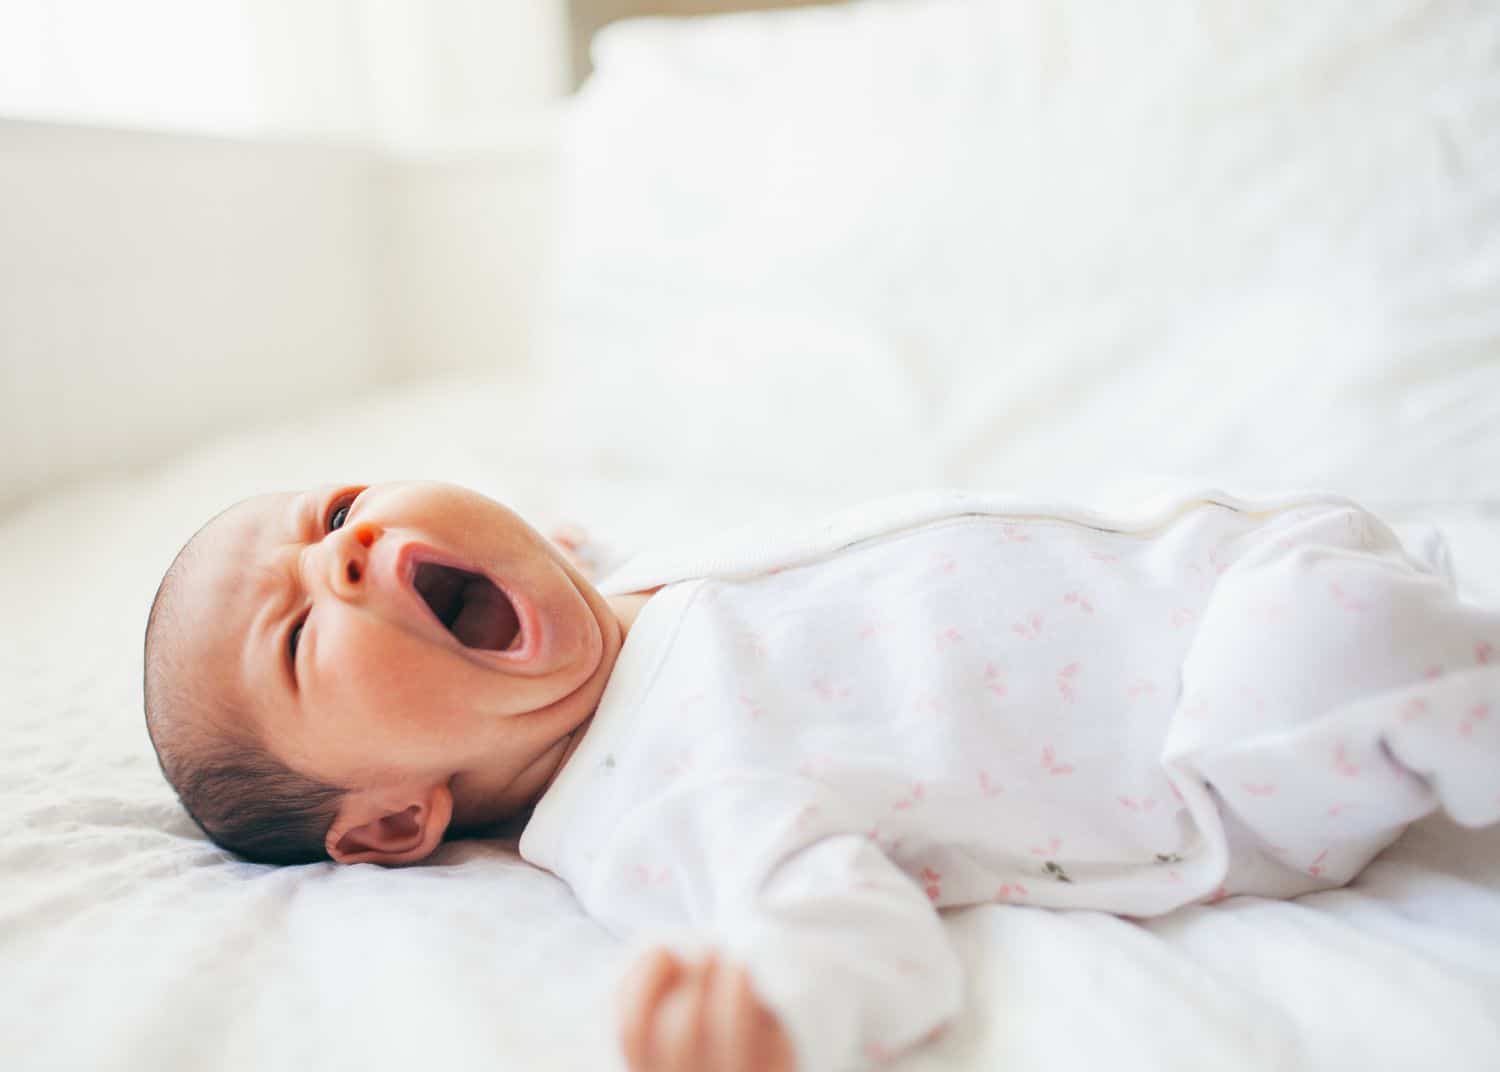 Recommended sleep hours for a 1-year-old baby: 12-14 hours per day, including naps